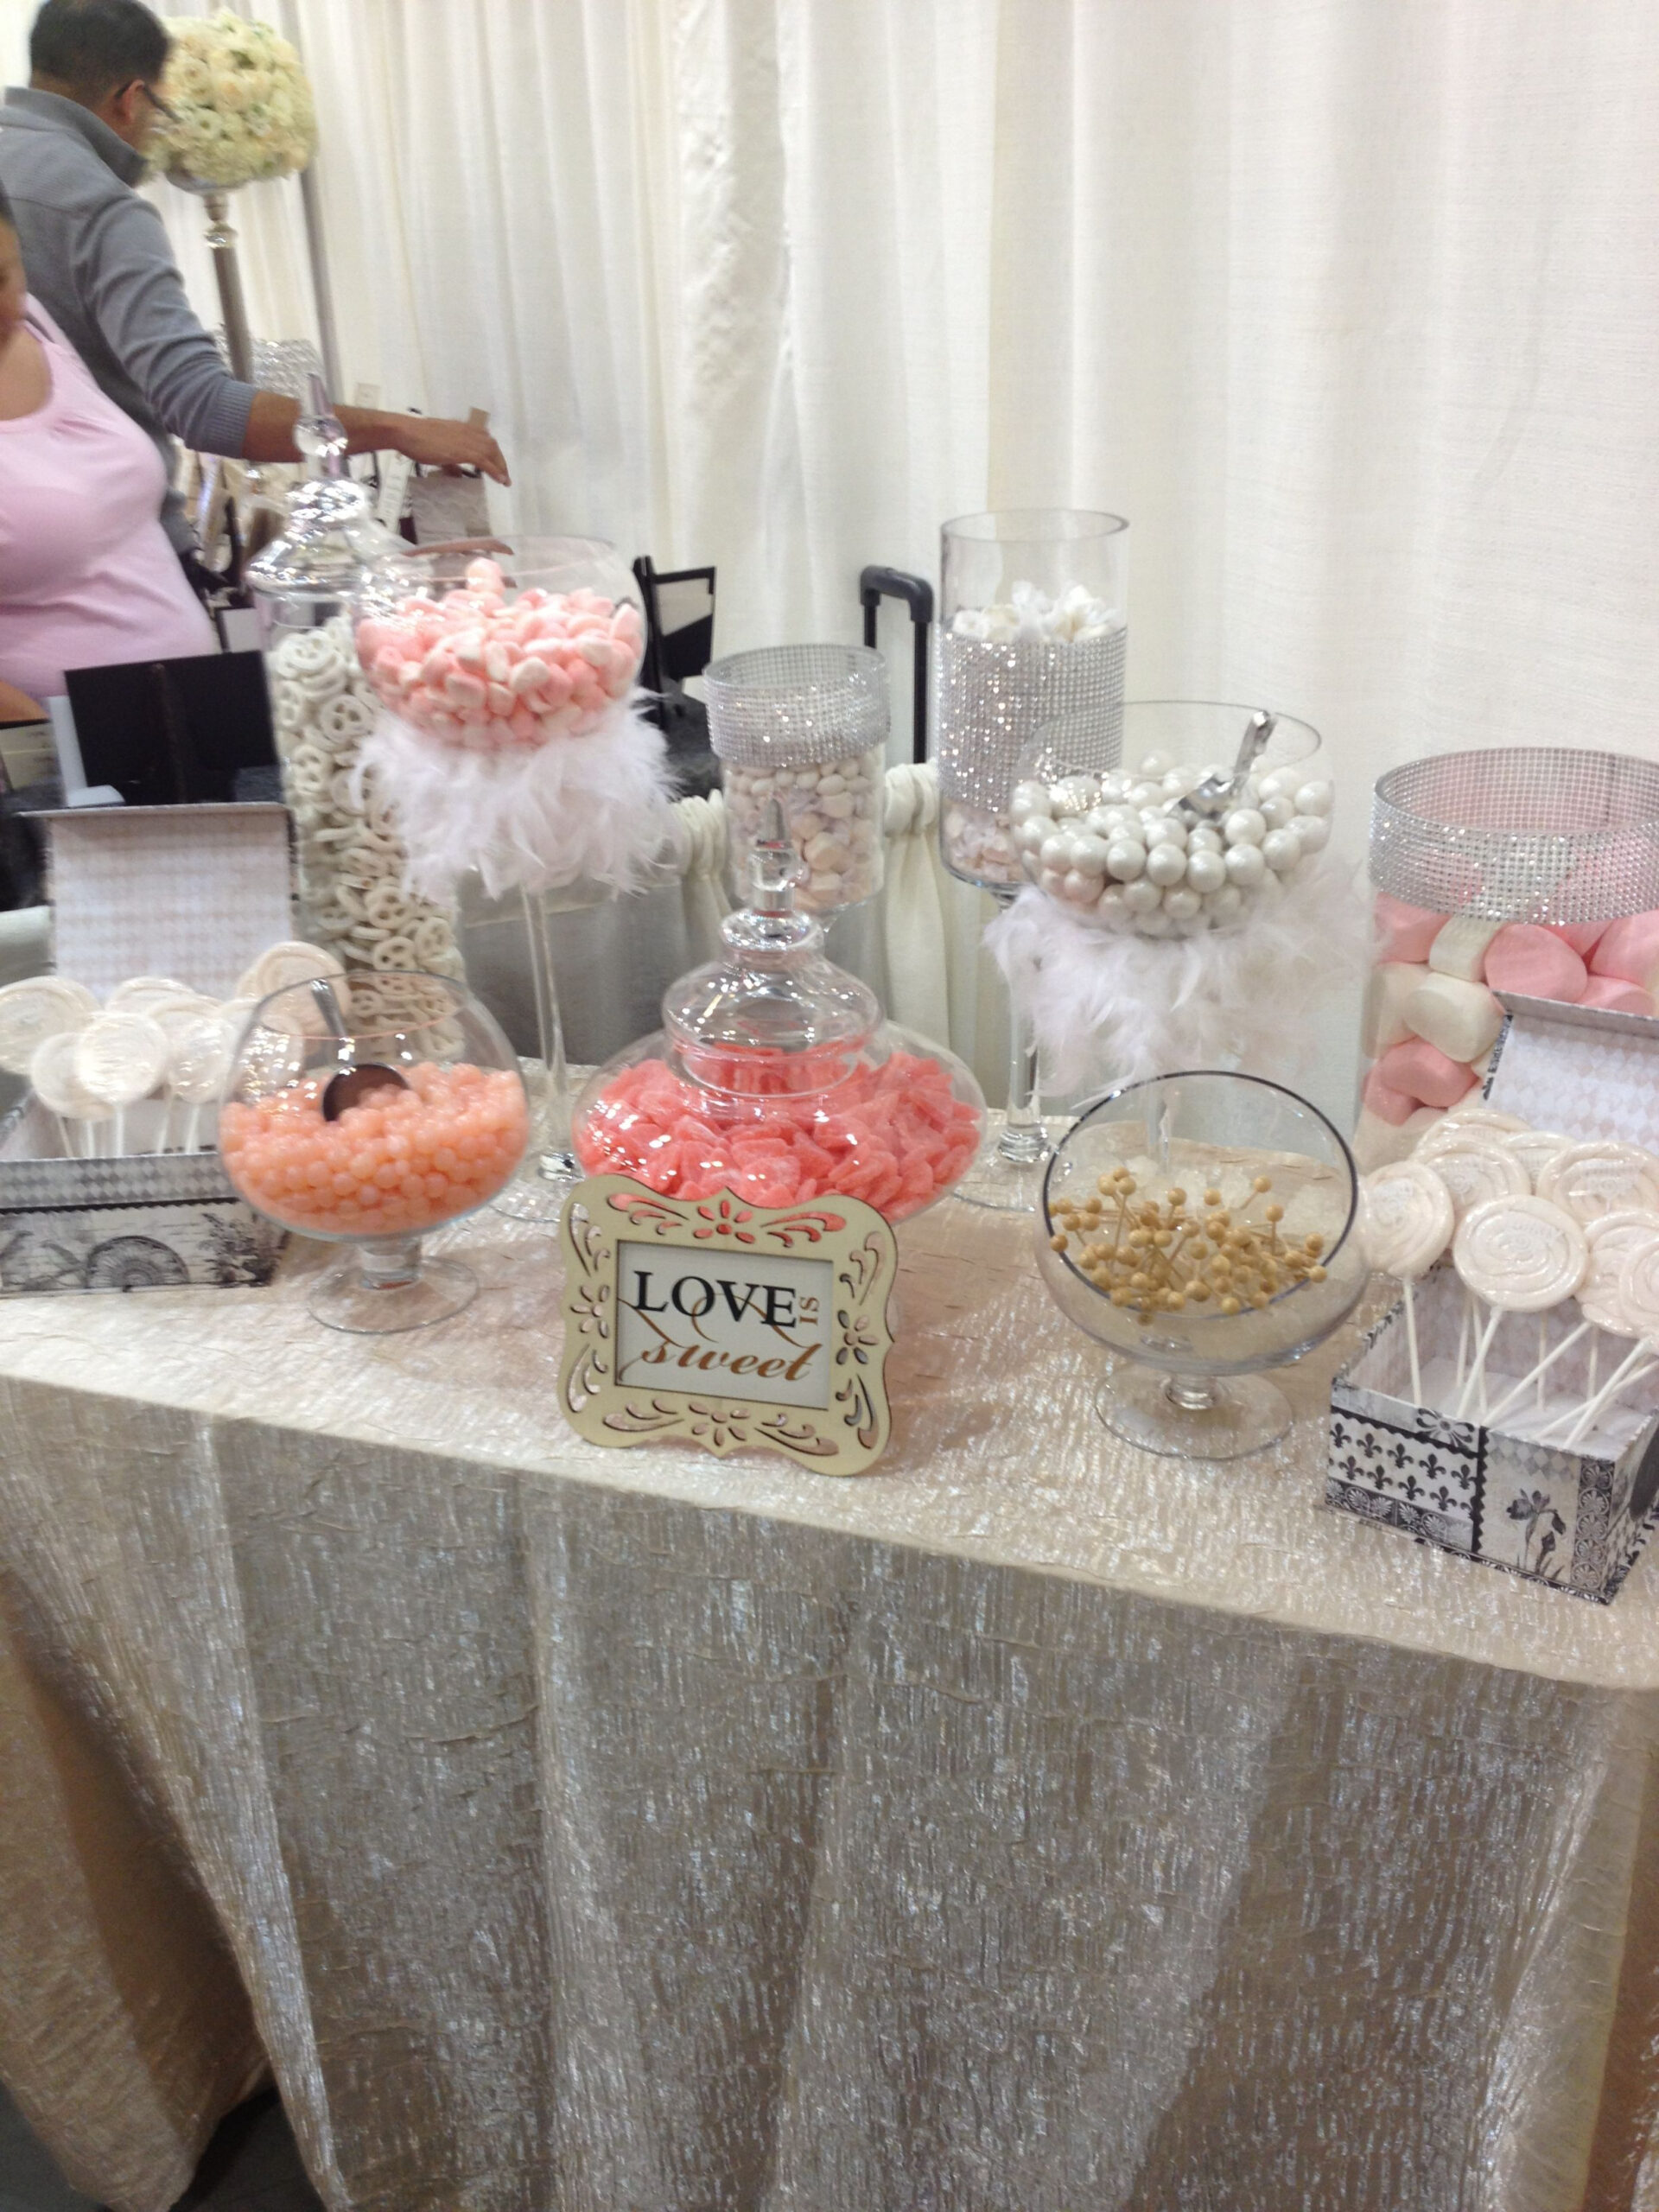 Pin By Elizabeth On Parties  Candy Bar Wedding, Candy Bar, Candy Display über Candy Bar Hochzeit